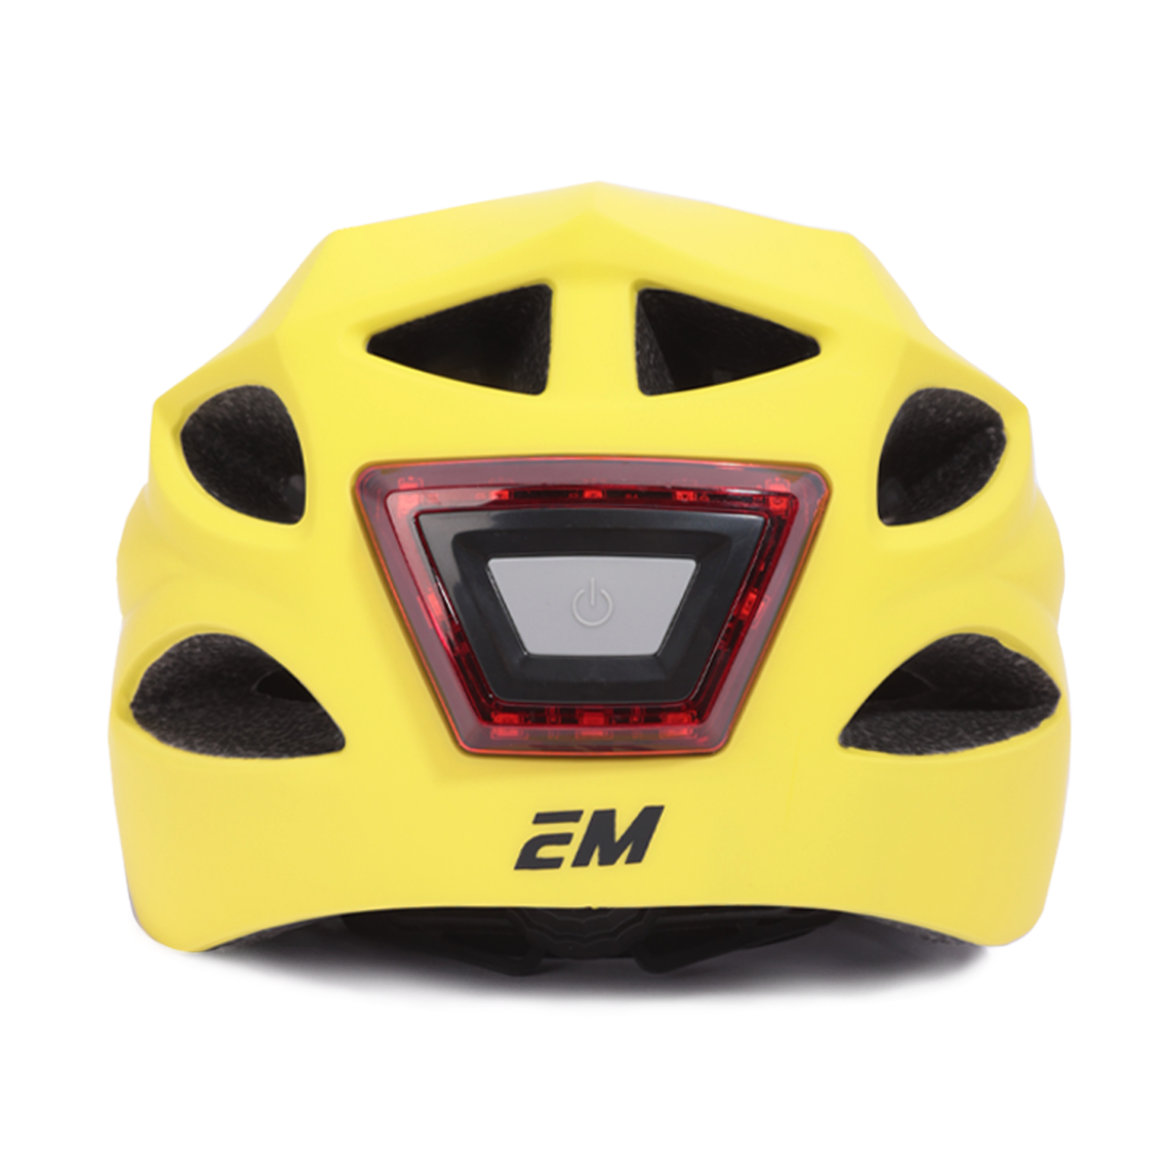 EMotorad Beacon Helmet - Adjustable Cycle Helmet with Front and Back LED Safety Light for Ages 12 Years and Above